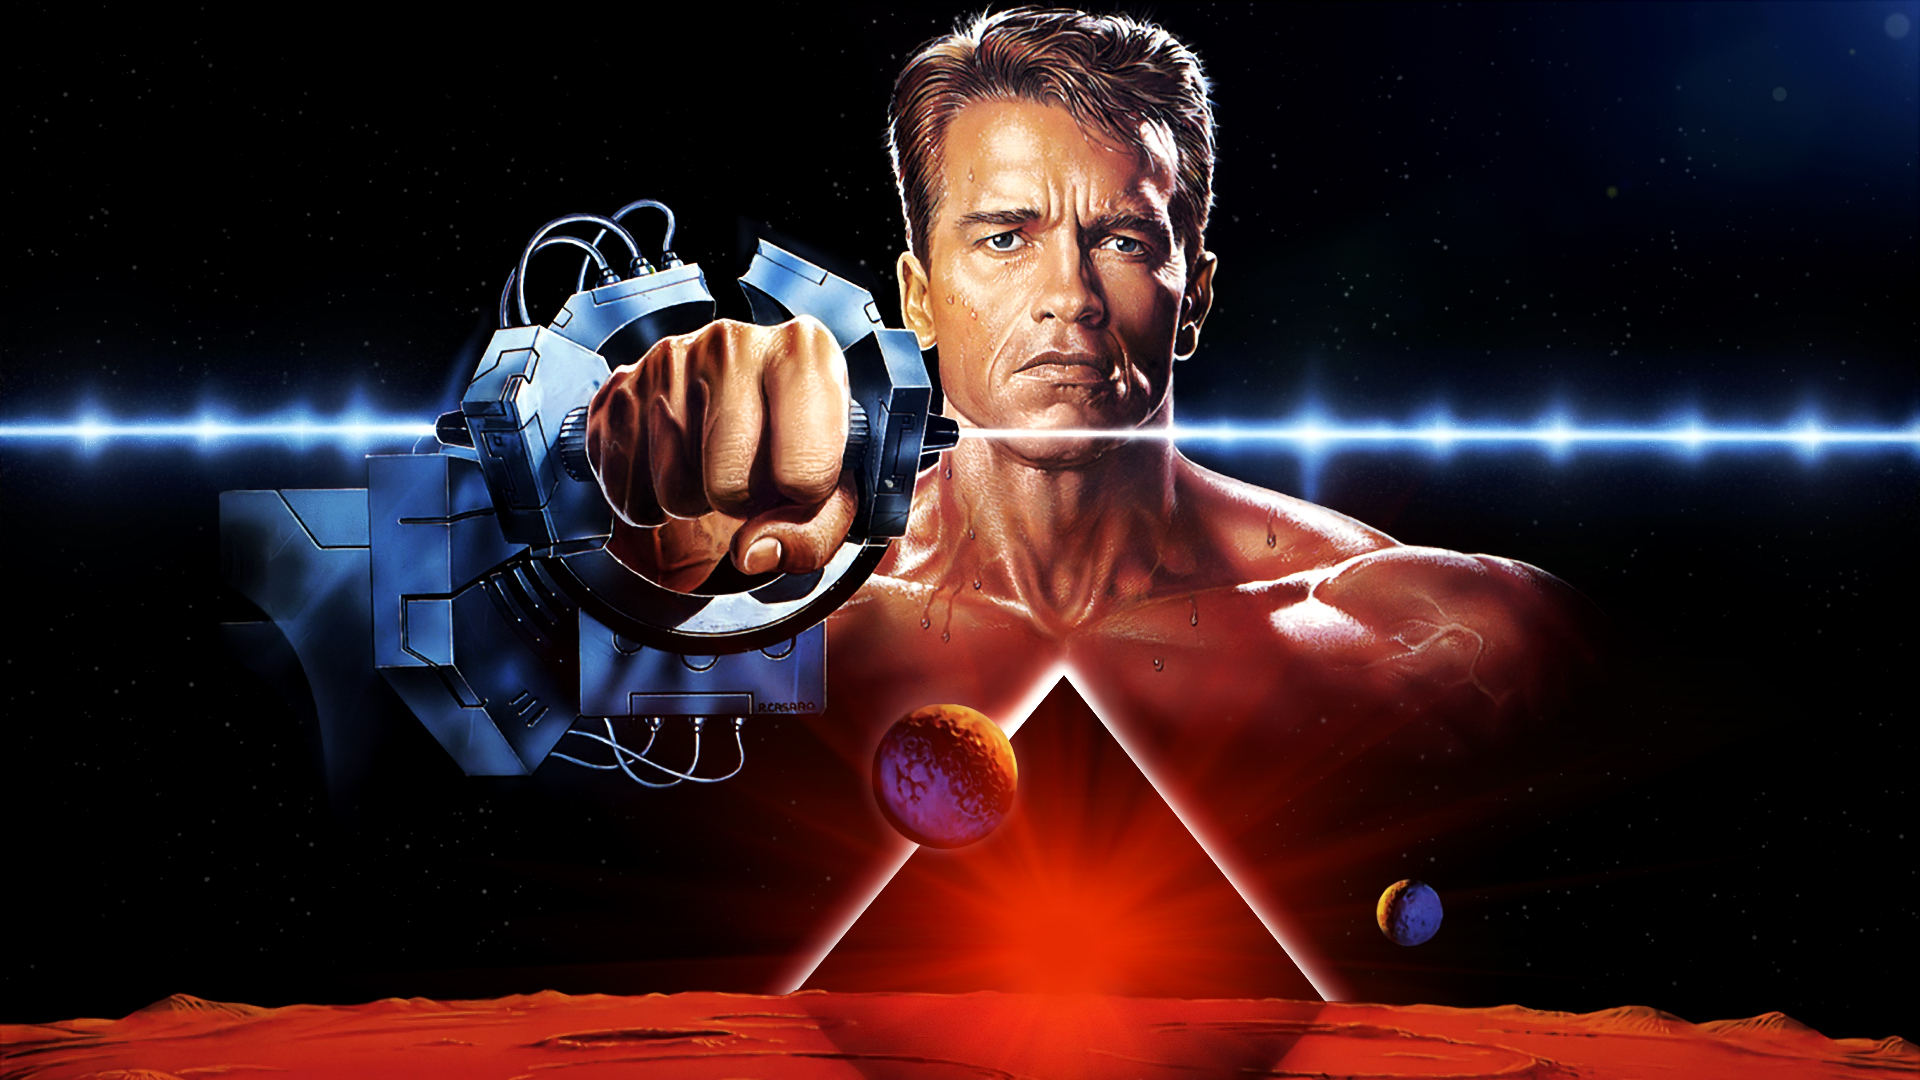 Movie Total Recall (1990) HD Wallpaper | Background Image